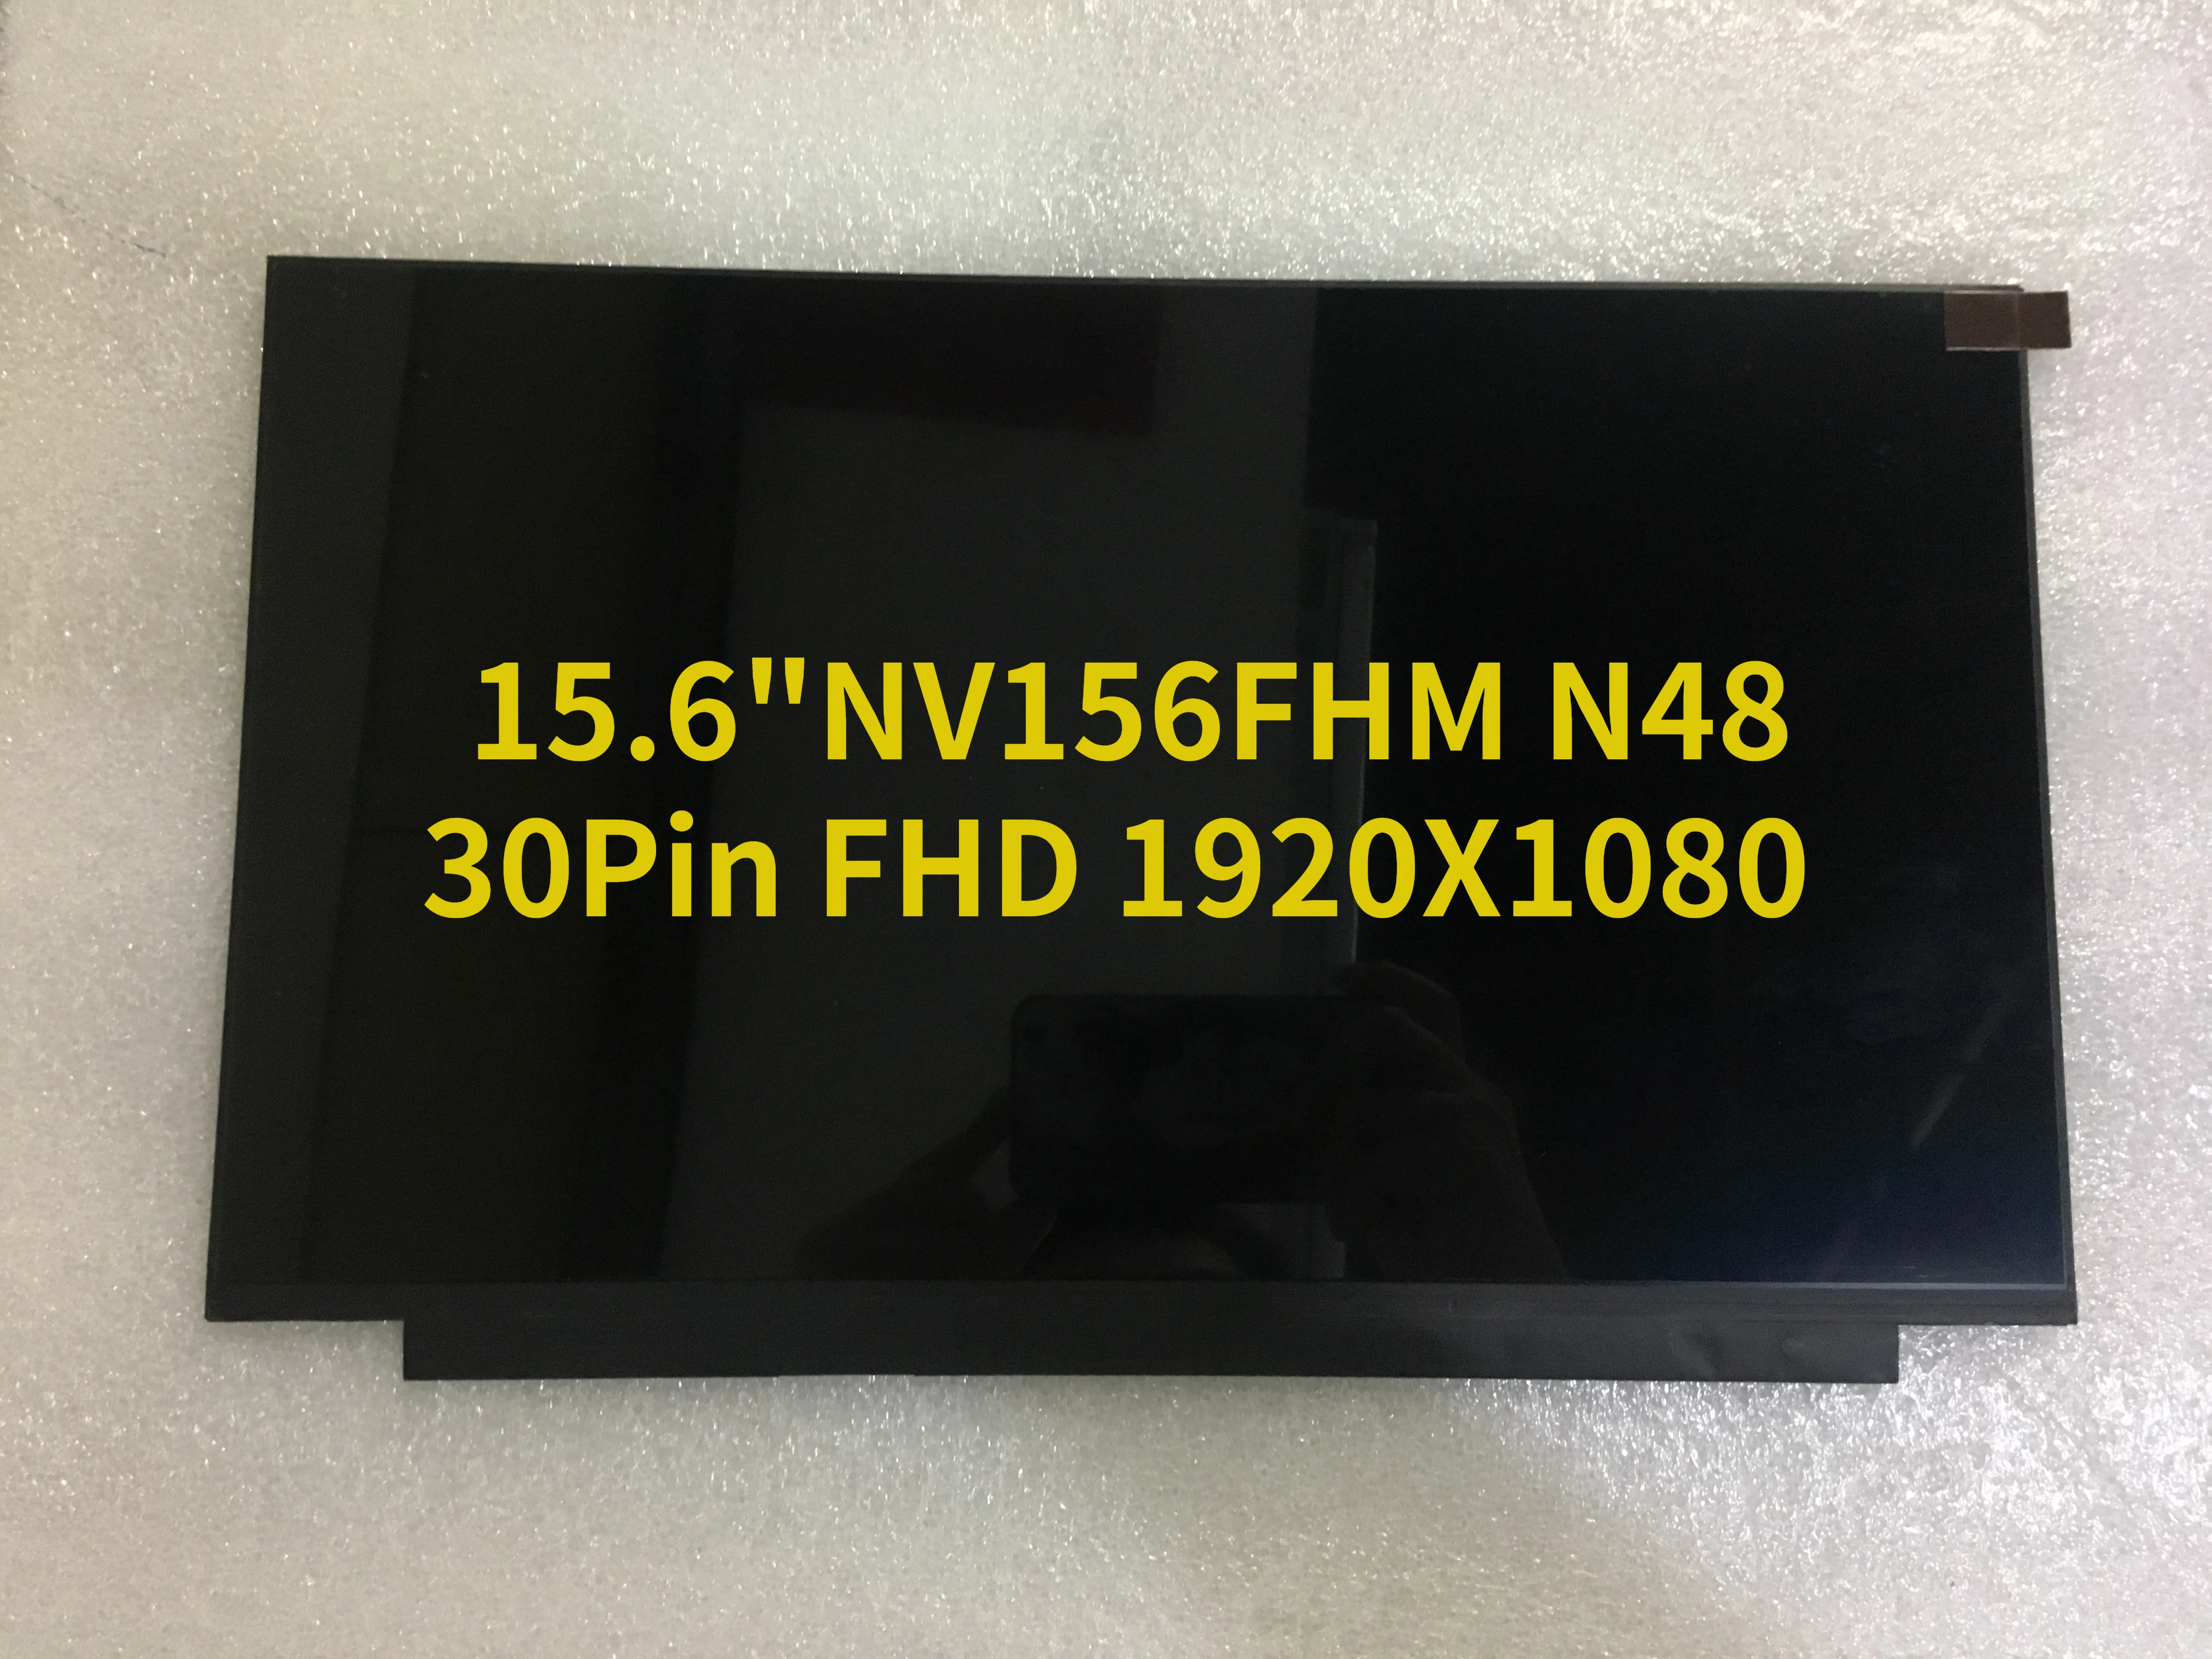 

NV156FHM-N48 NV156FHM N48 LED Screen LCD Display Matrix for Laptop 15.6" 30Pin FHD 1920X1080 Matte Replacement IPS Screen